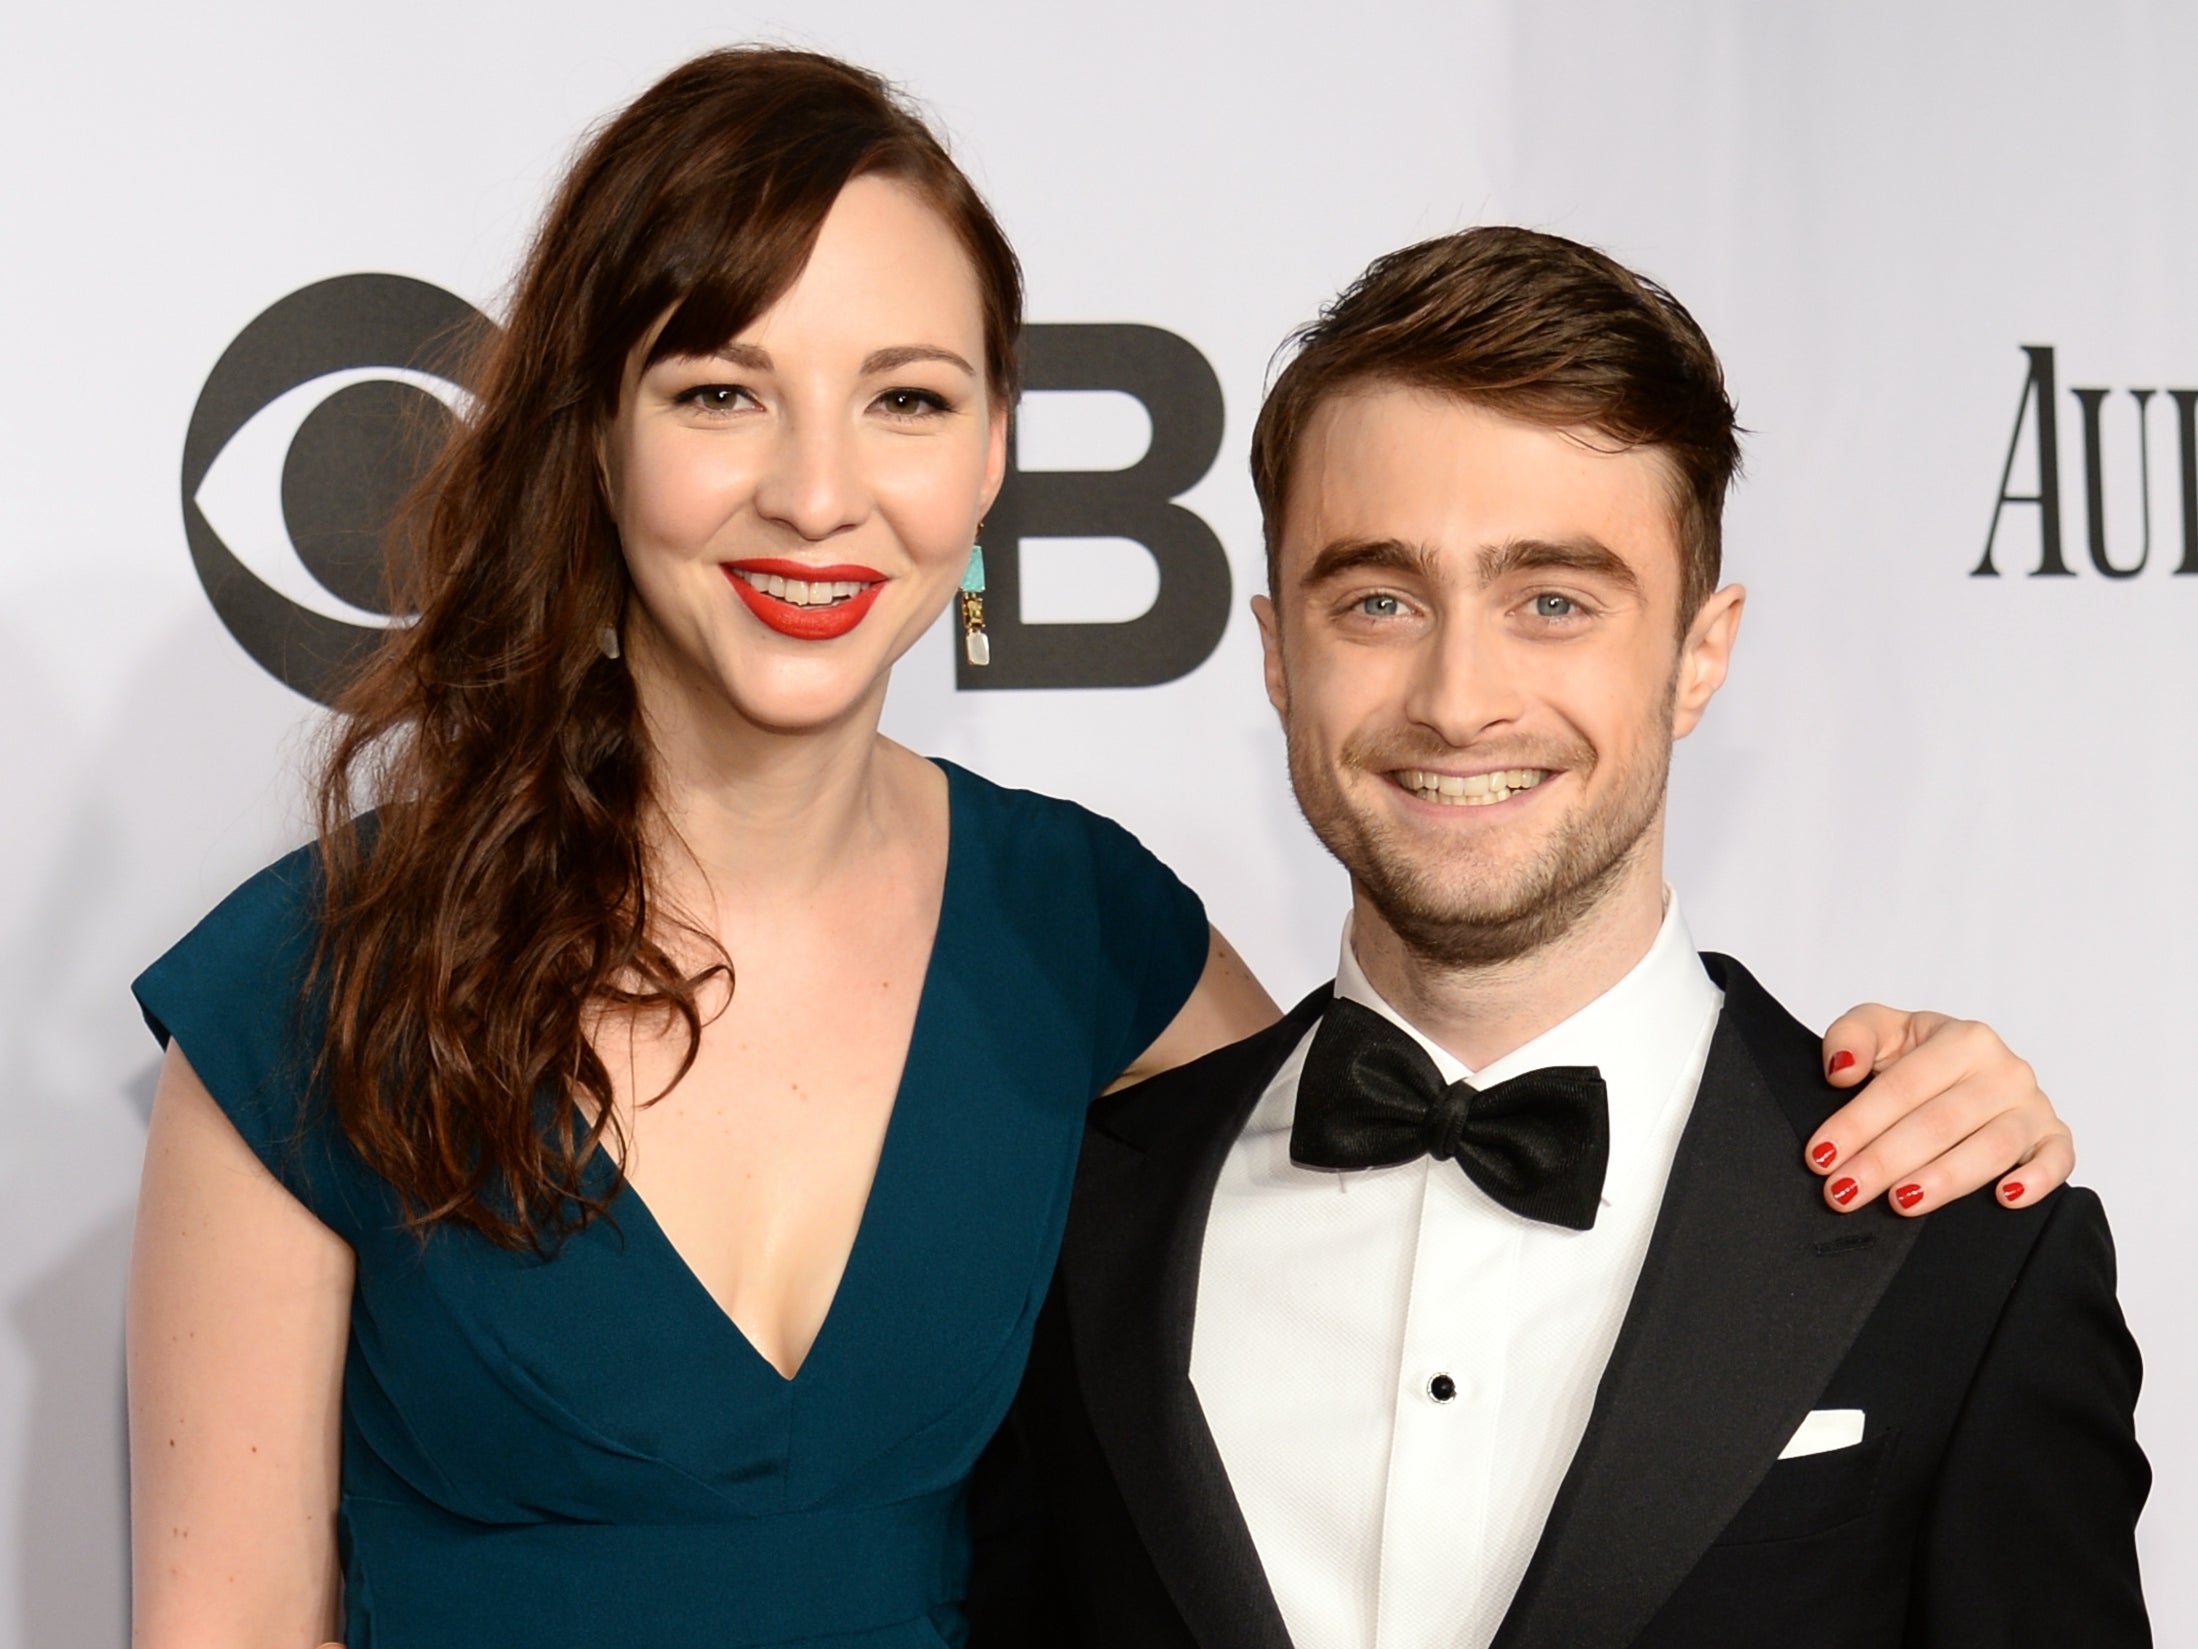 Daniel Radcliffe says hes really happy with girlfriend Erin Darke after almost 10 years together The Independent pic